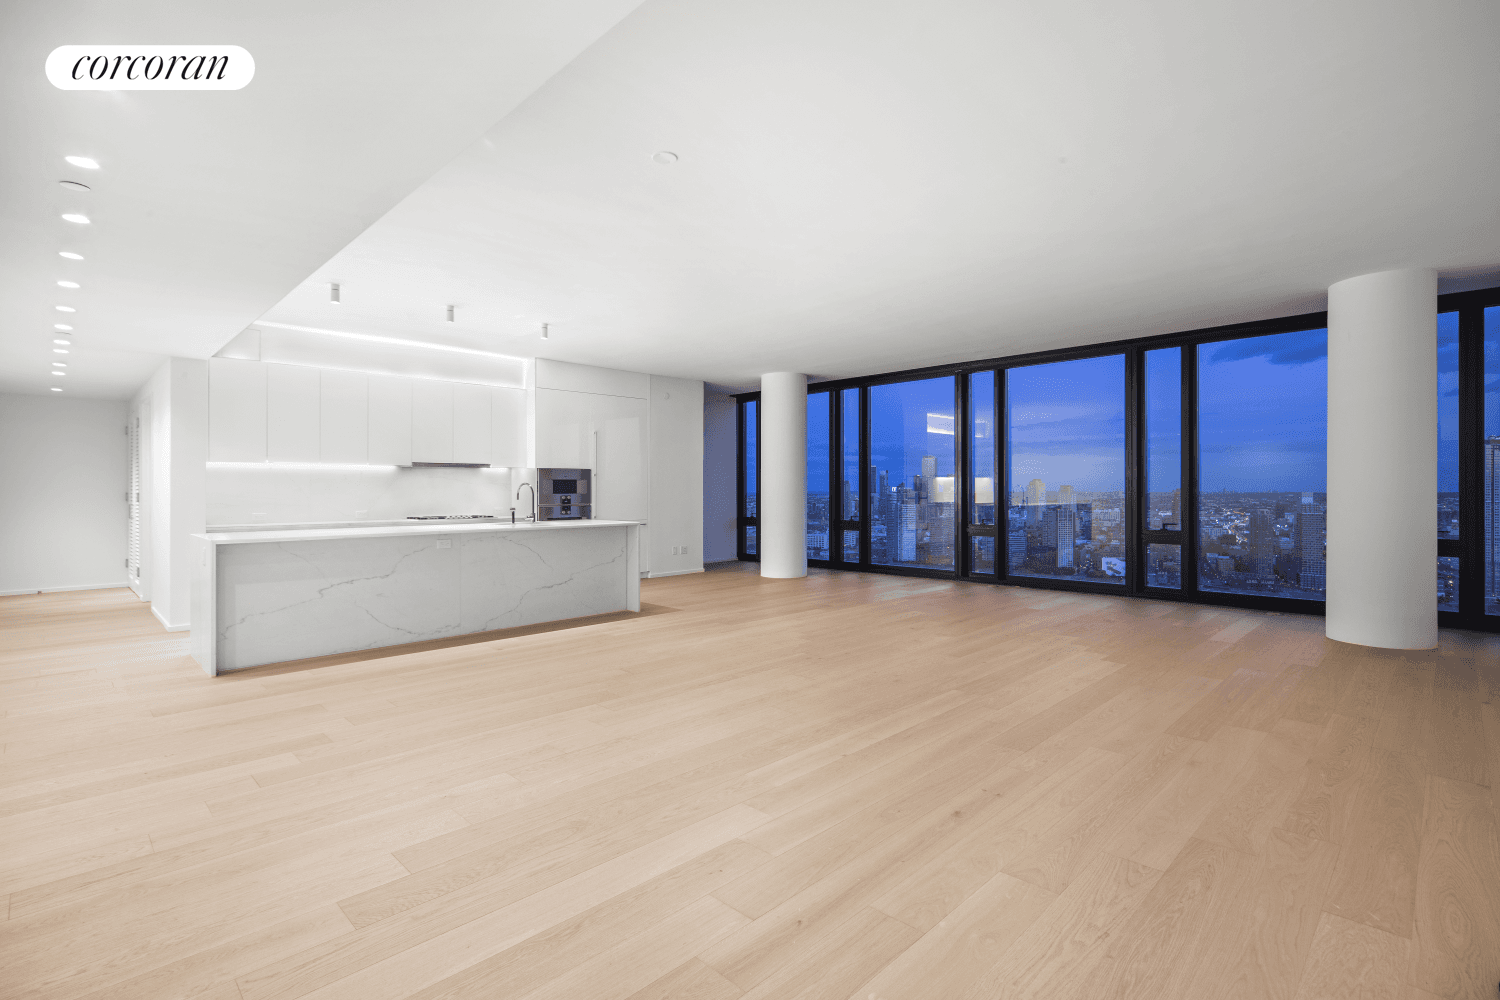 Residence 41A at One United Nations Park is a 2, 900sf four bedroom, four and a half bathroom residence overlooking the East River.